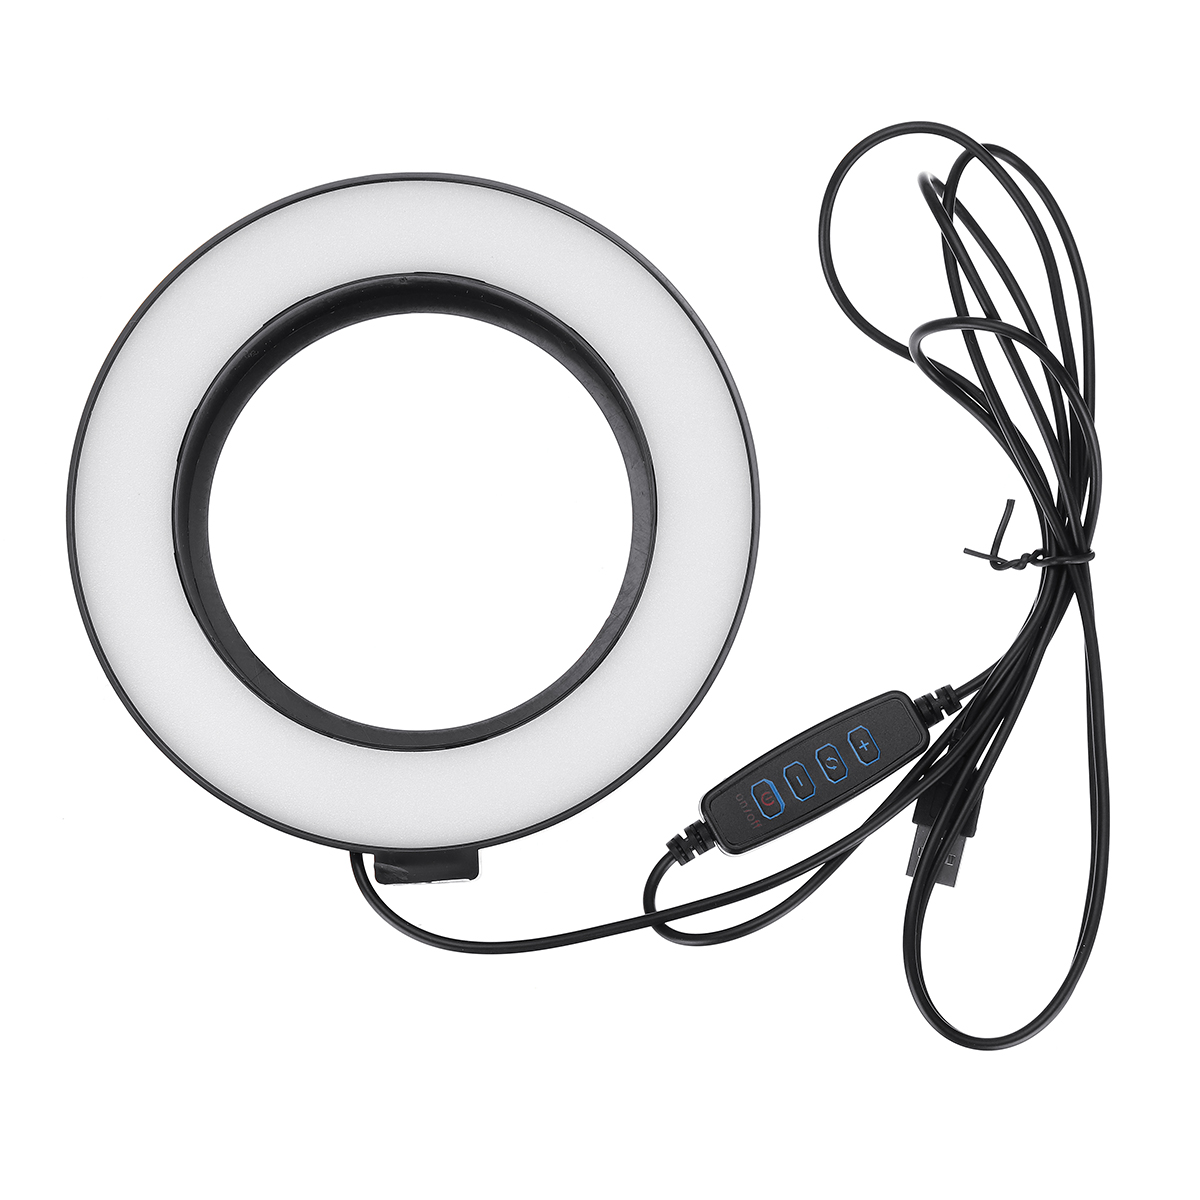 6-Inch-Ring-LED-Live-Light-Photographic-Lamp-with-Bracket-1655933-2